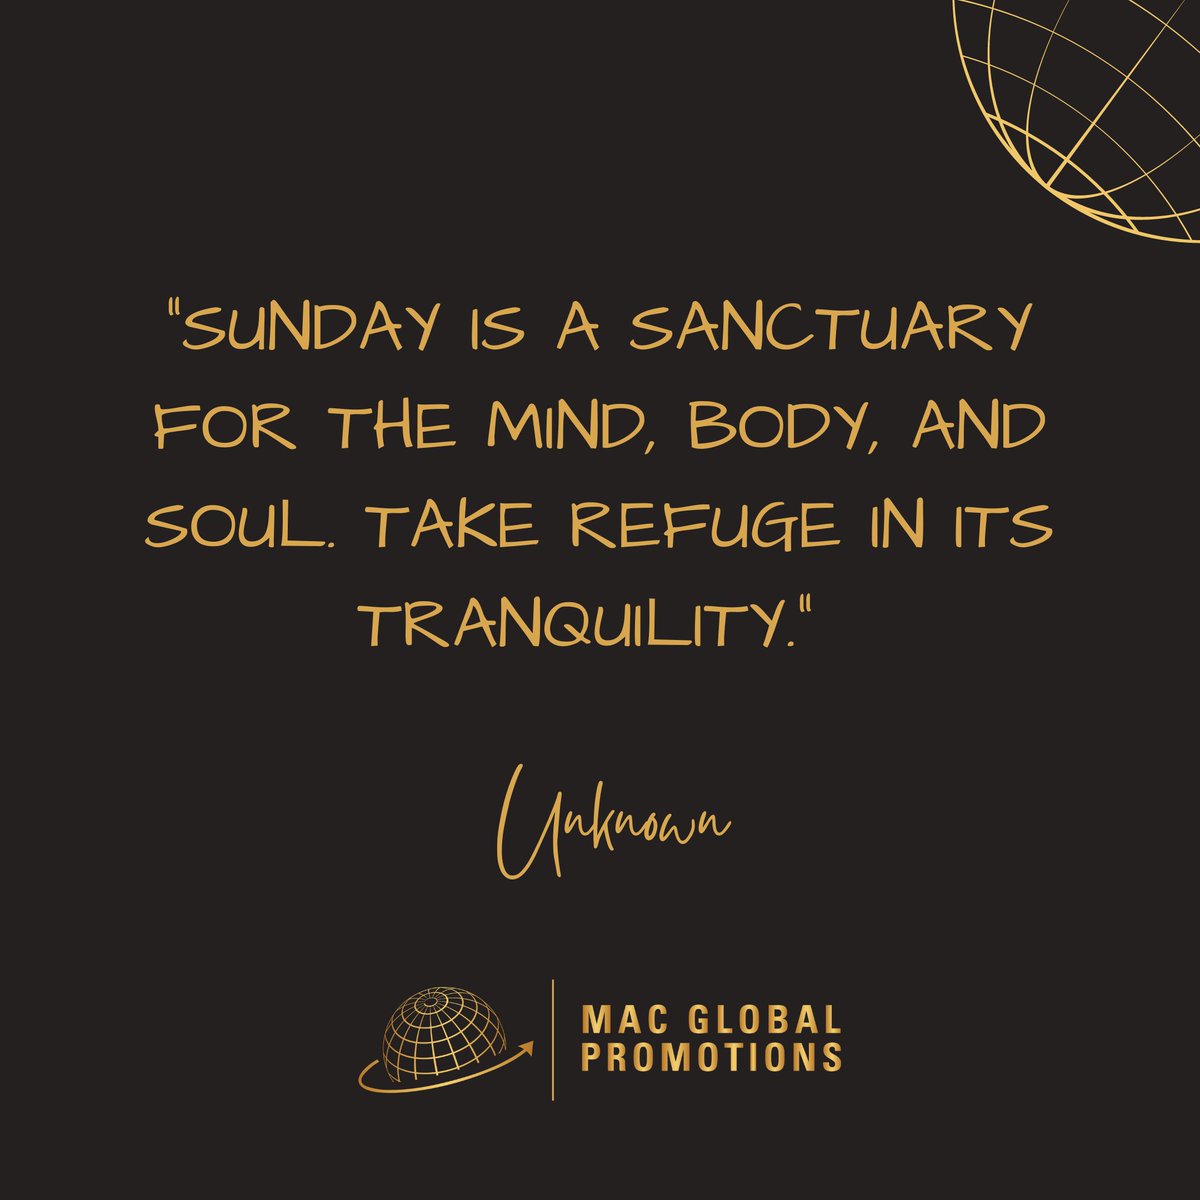 Find solace and tranquility on this sanctuary Sunday, as you create space for inner peace and reflection. 🕊️🌿 #SanctuarySunday